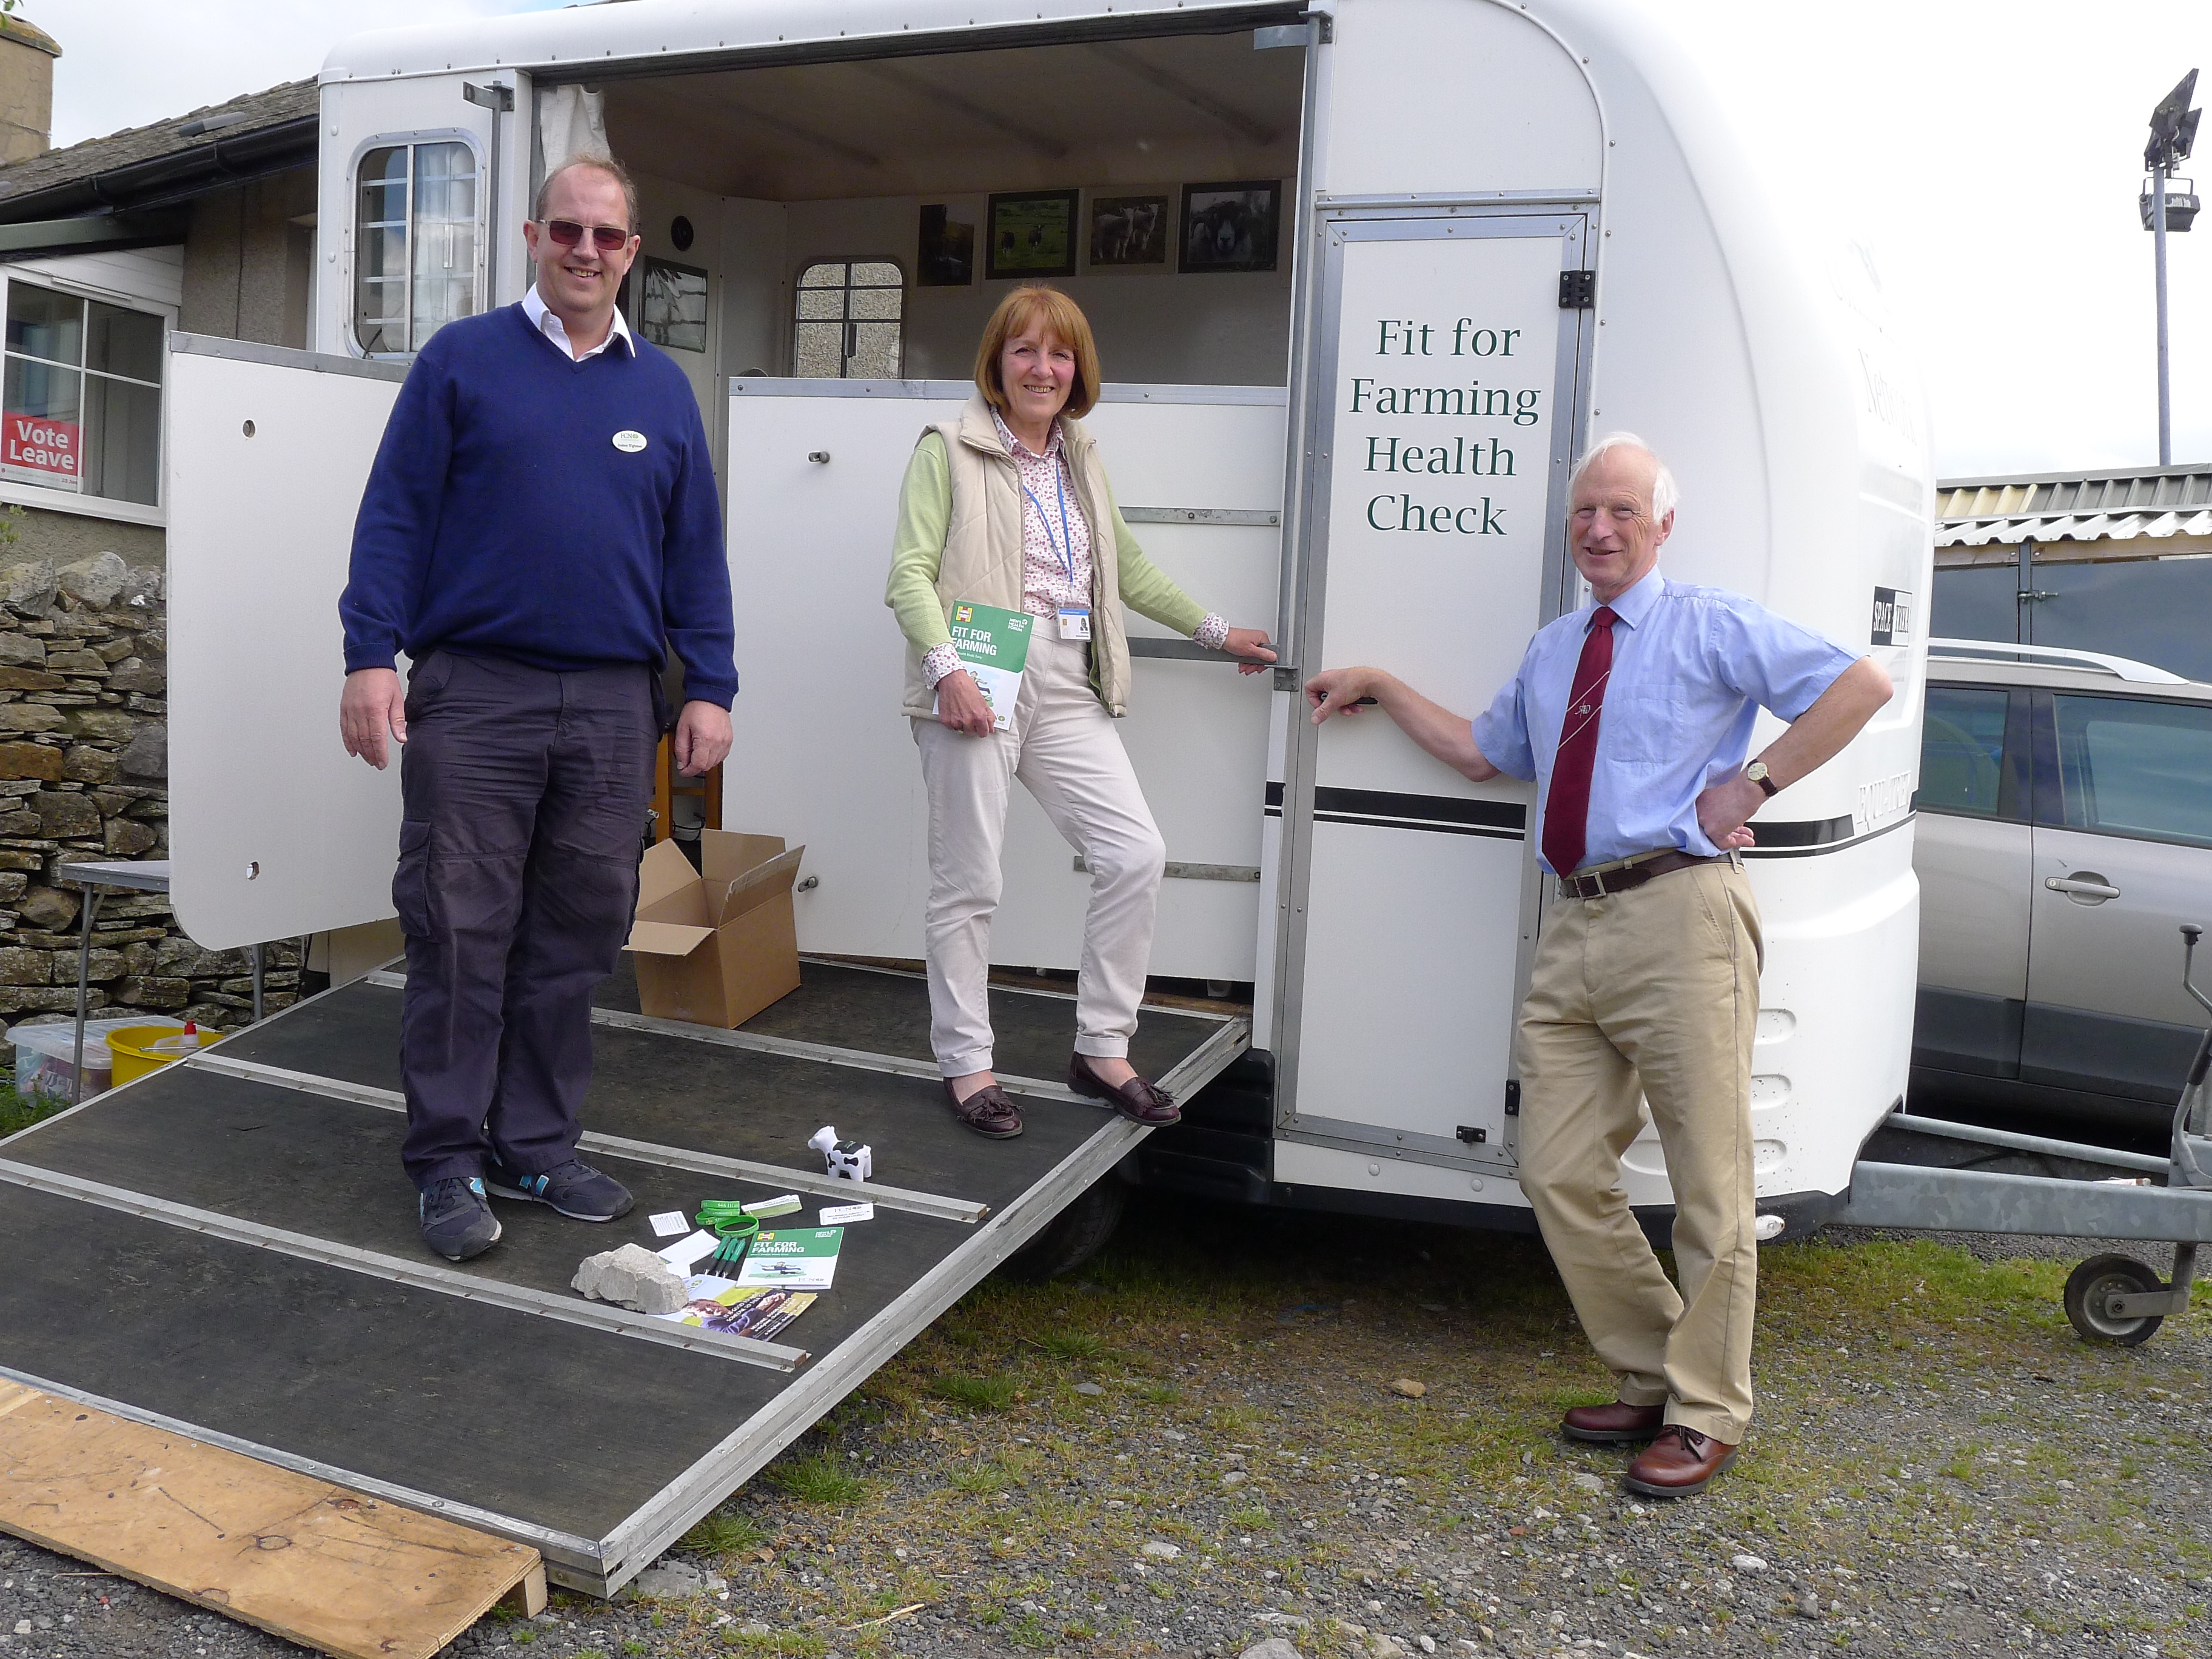 FARMING COMMUNITY NETWORK (FCN) VOLUNTEERS IN LANCASHIRE WITH THEIR HEALTH CHECK TRAILER AT BENTHAM MARKET. 